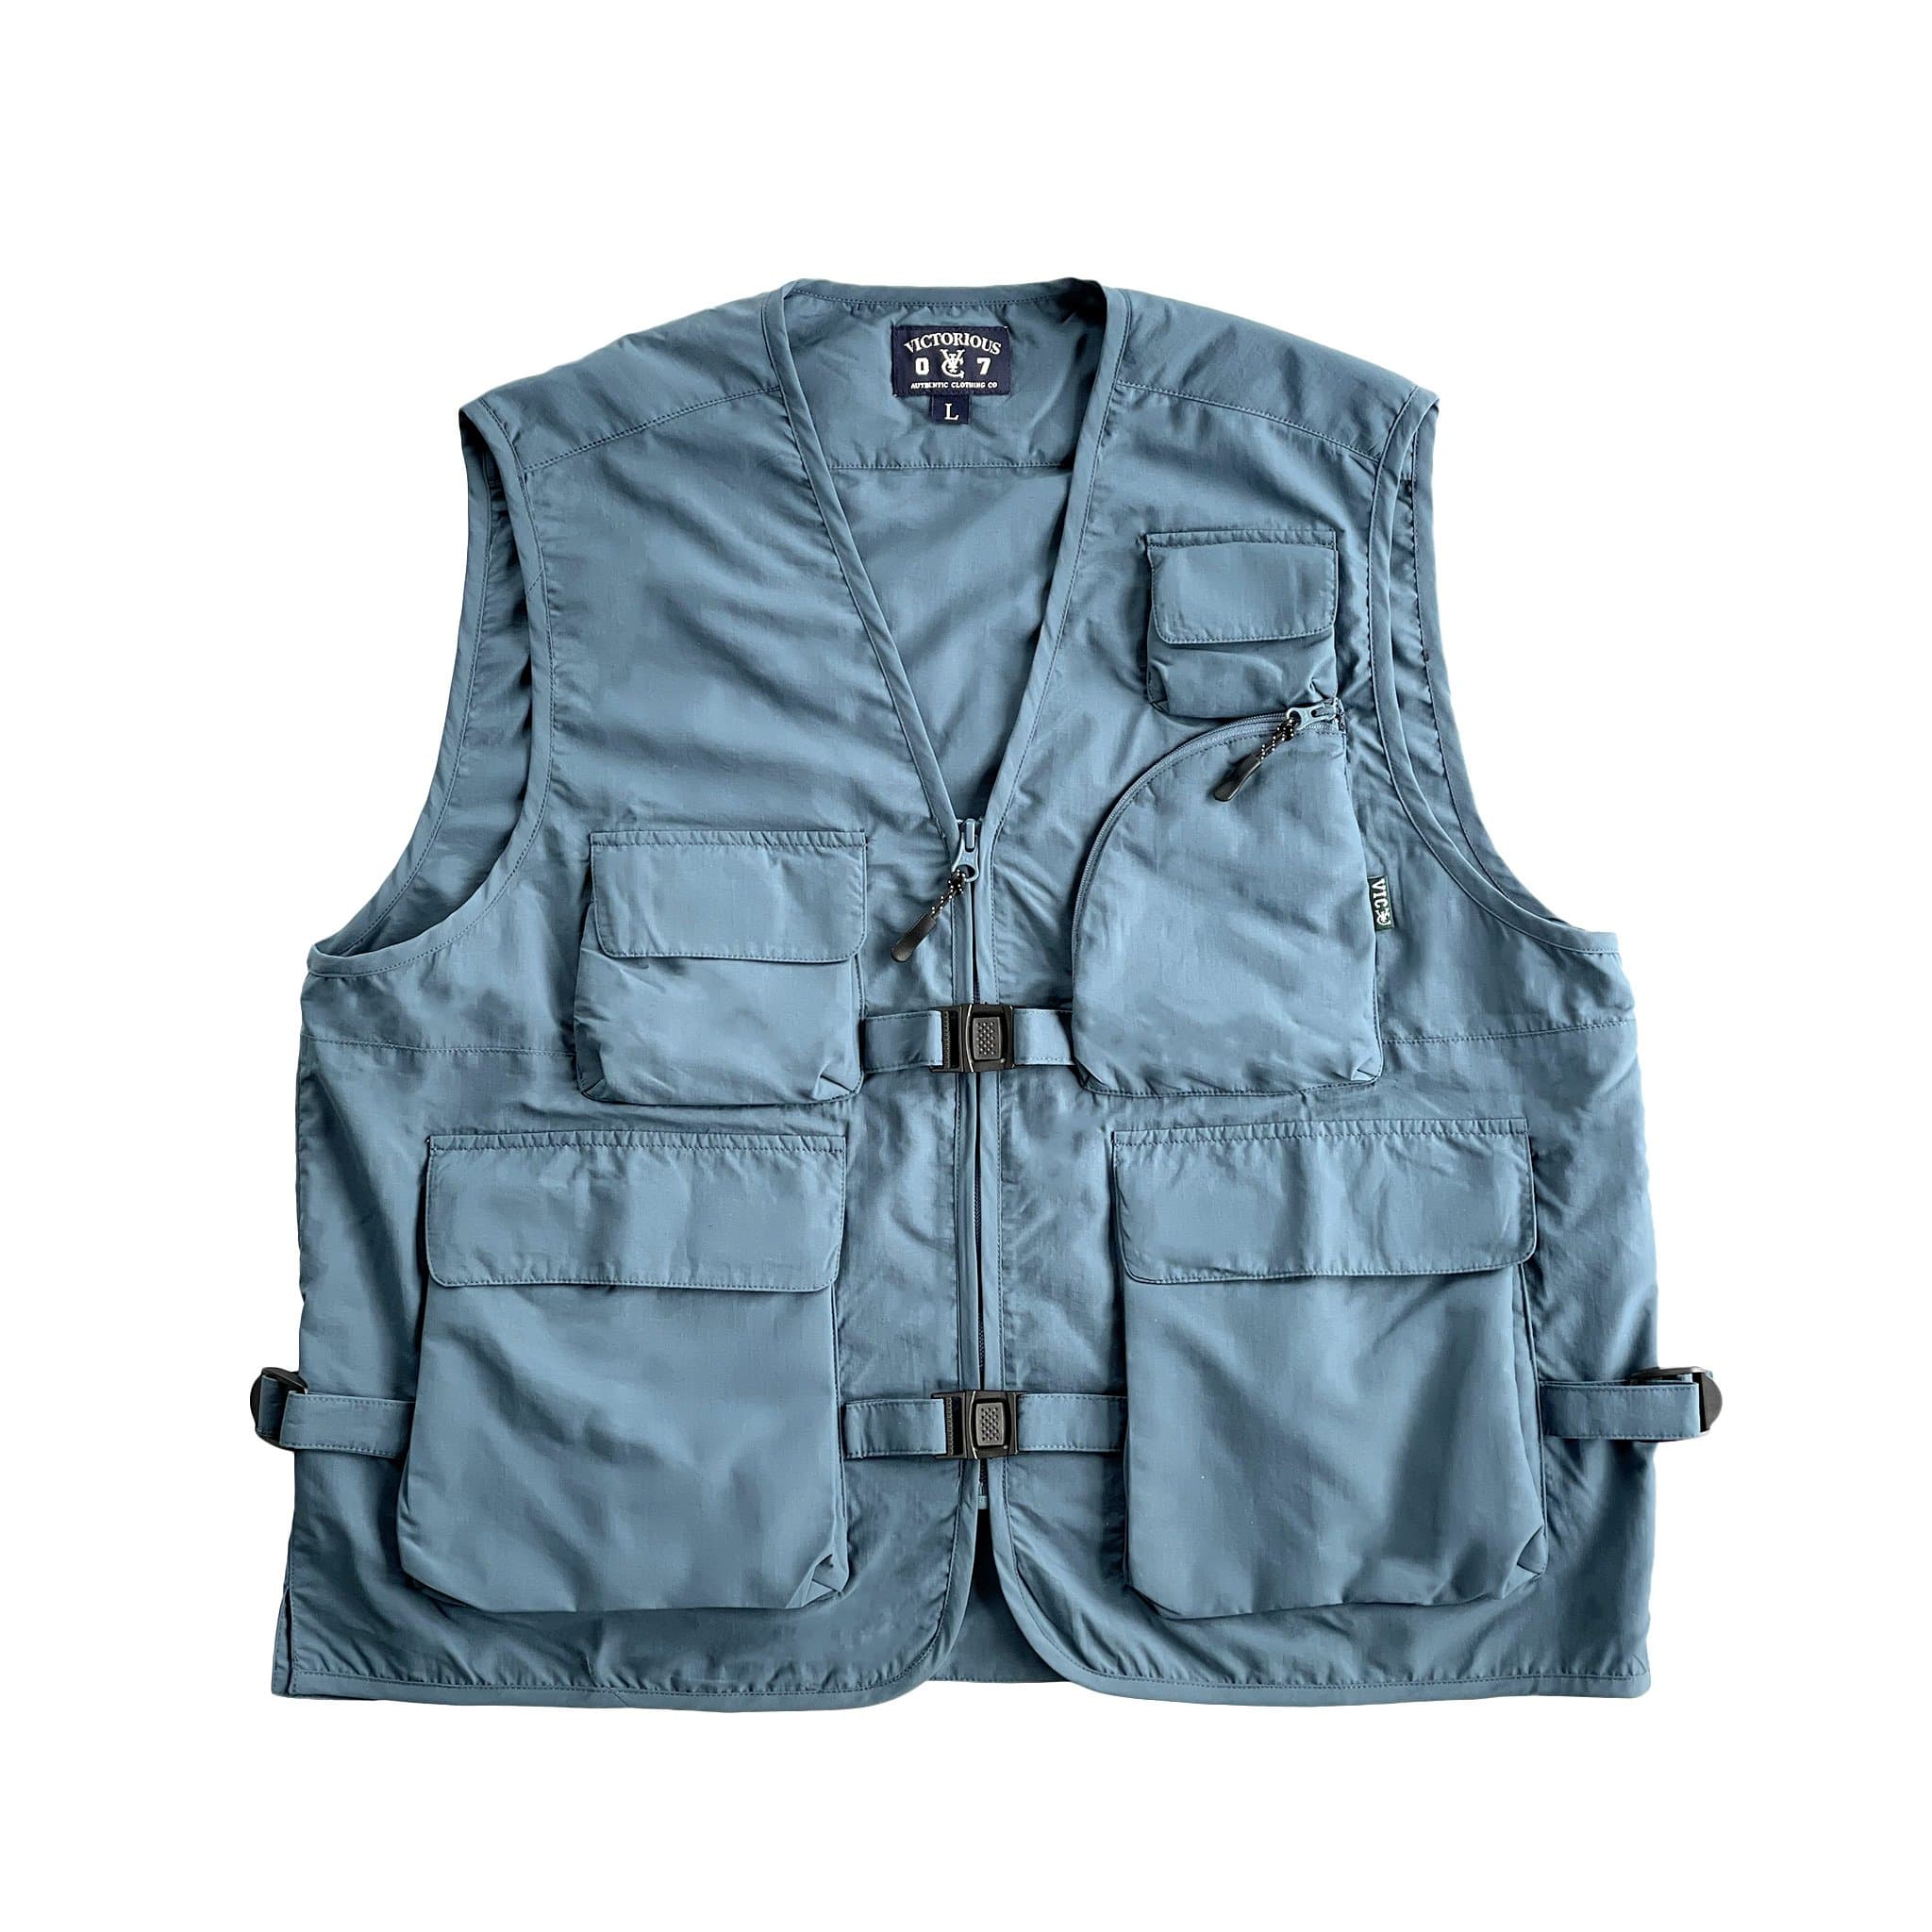 VIC Utility Vest / Inspired by vintage workwear silhouettes : Boxy fit / 100% Polyester, durable water resistant coating / Two way zip closure at front / 5 front pockets / 2 quick release buckles & side closures for layering / Hidden pocket at centre back / VIC woven flag label at front left chest pocket 